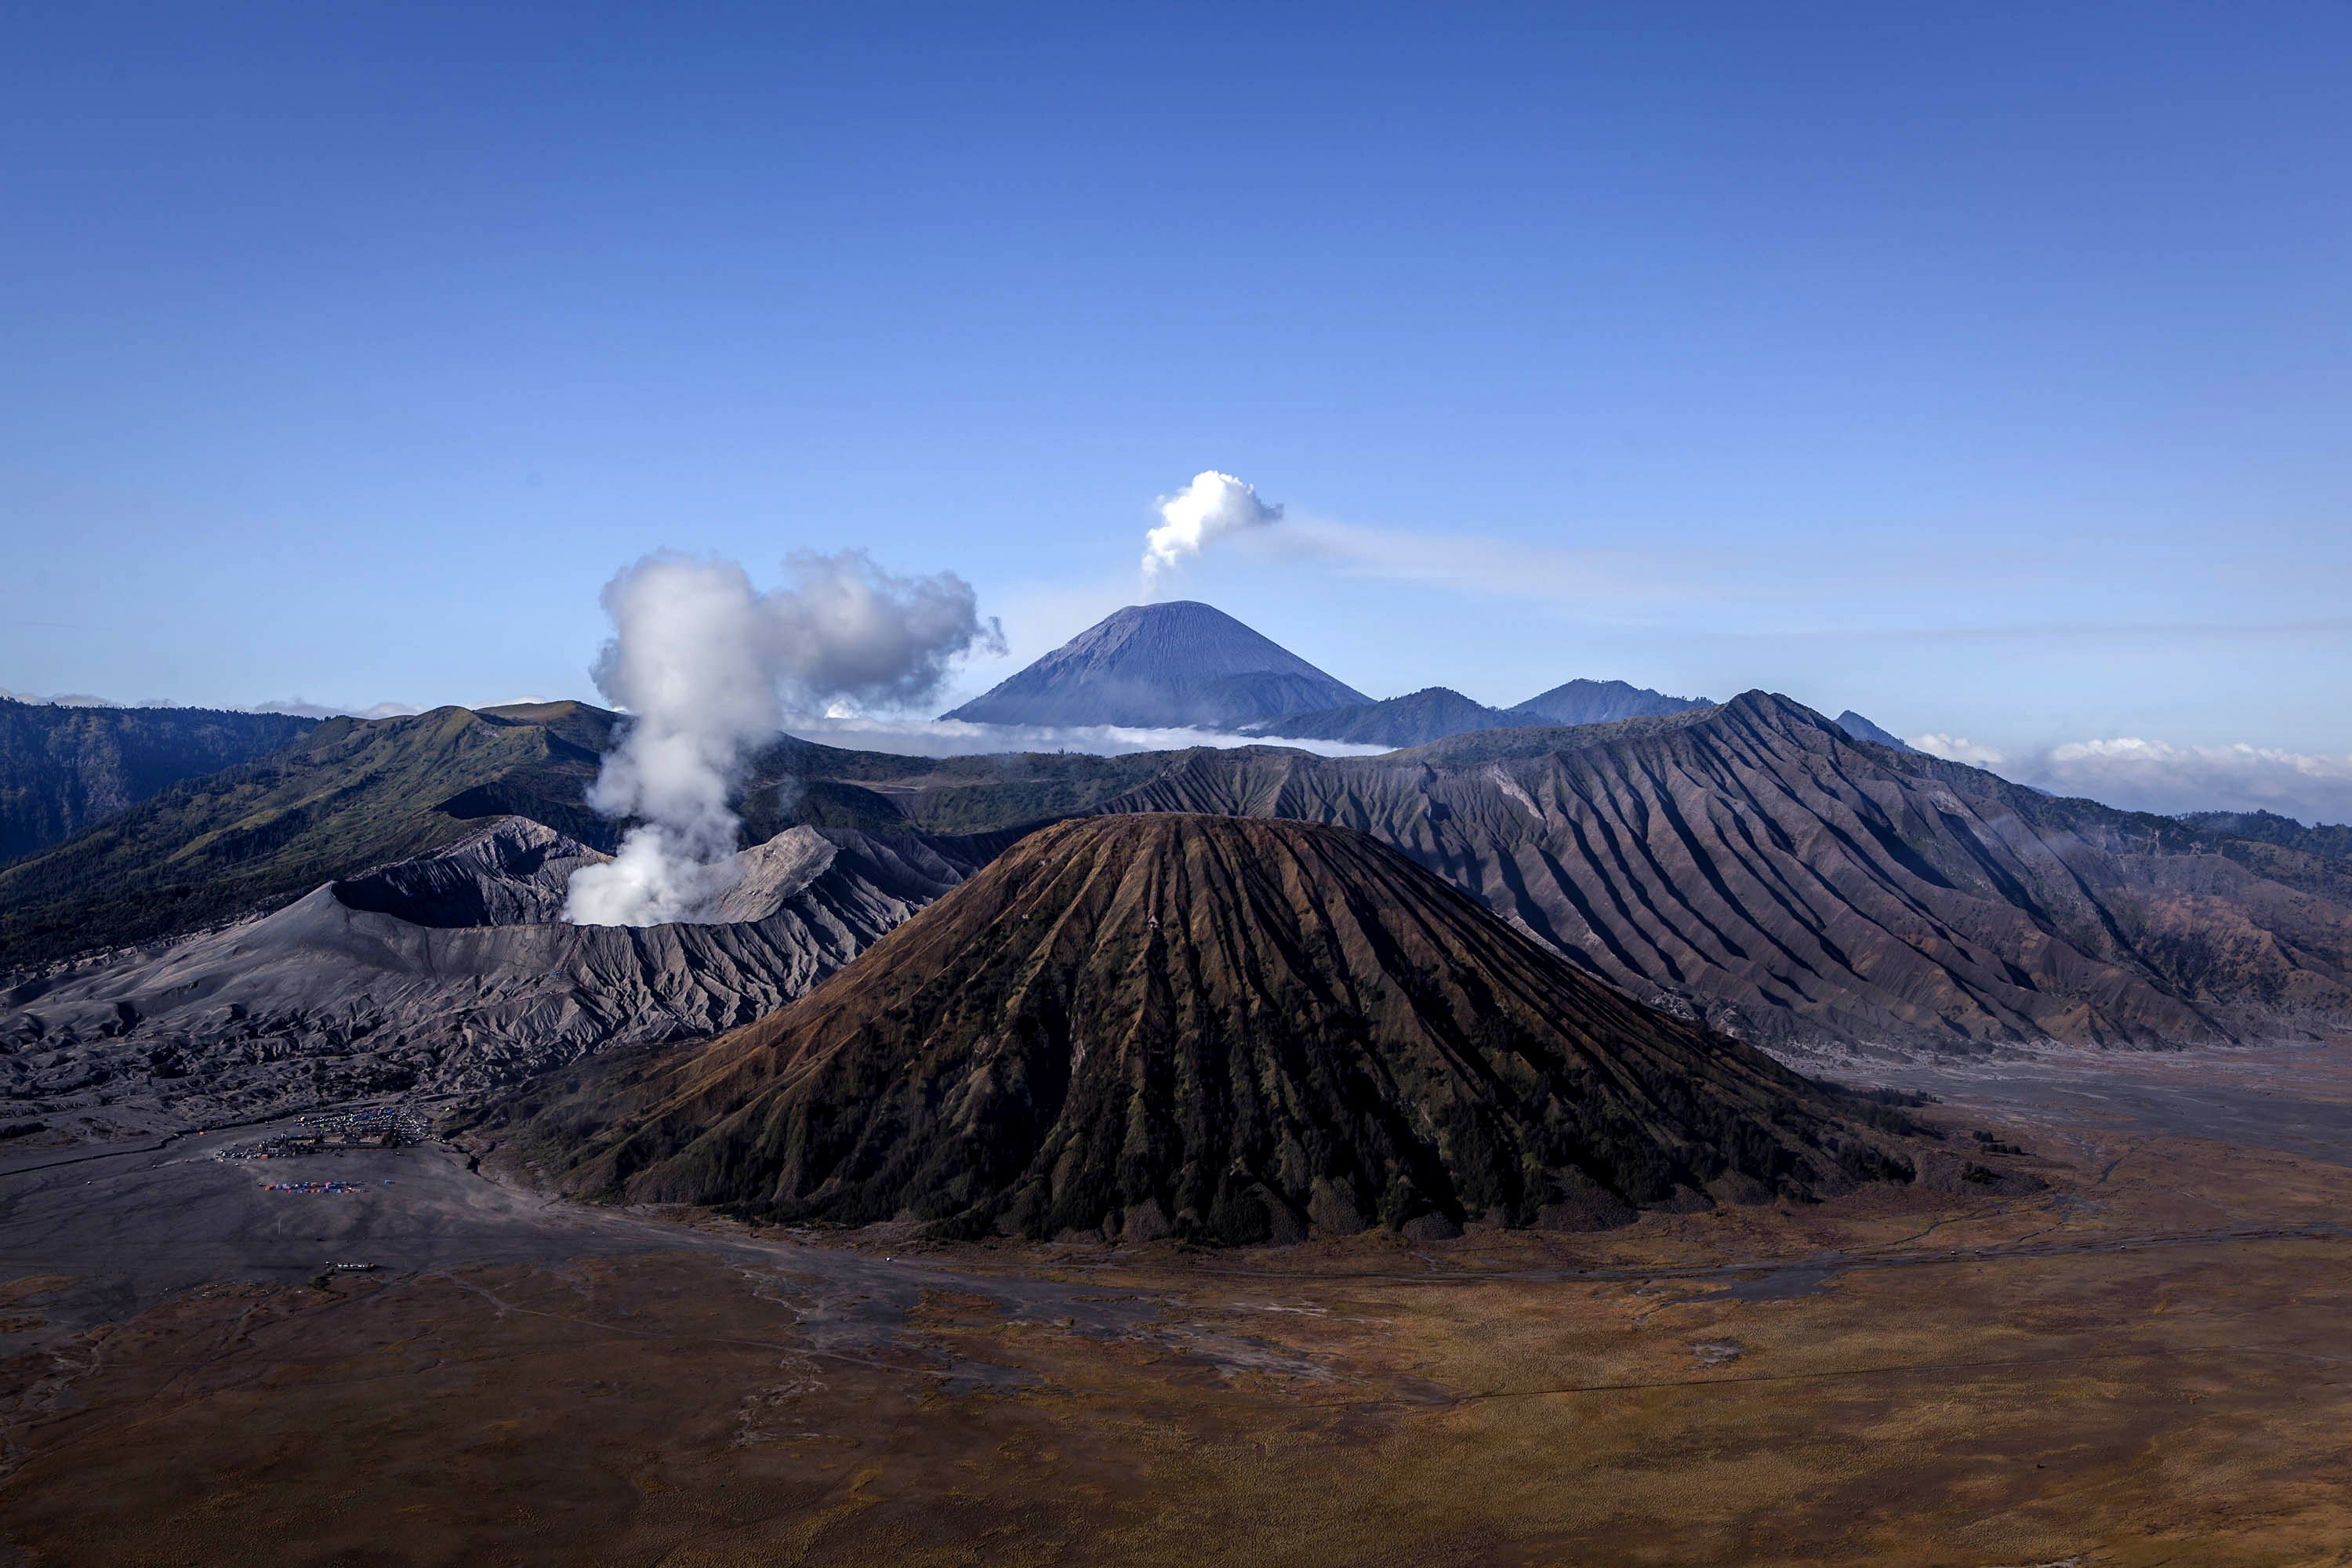 General view of the Bromo Tengger Semeru National Park, with Mount Bromo, the location of the Tenggerese villages where the Tenggerese Hindu Yadnya Kasada Festival is held on August 11, 2014 in Probolinggo, Java, Indonesia.